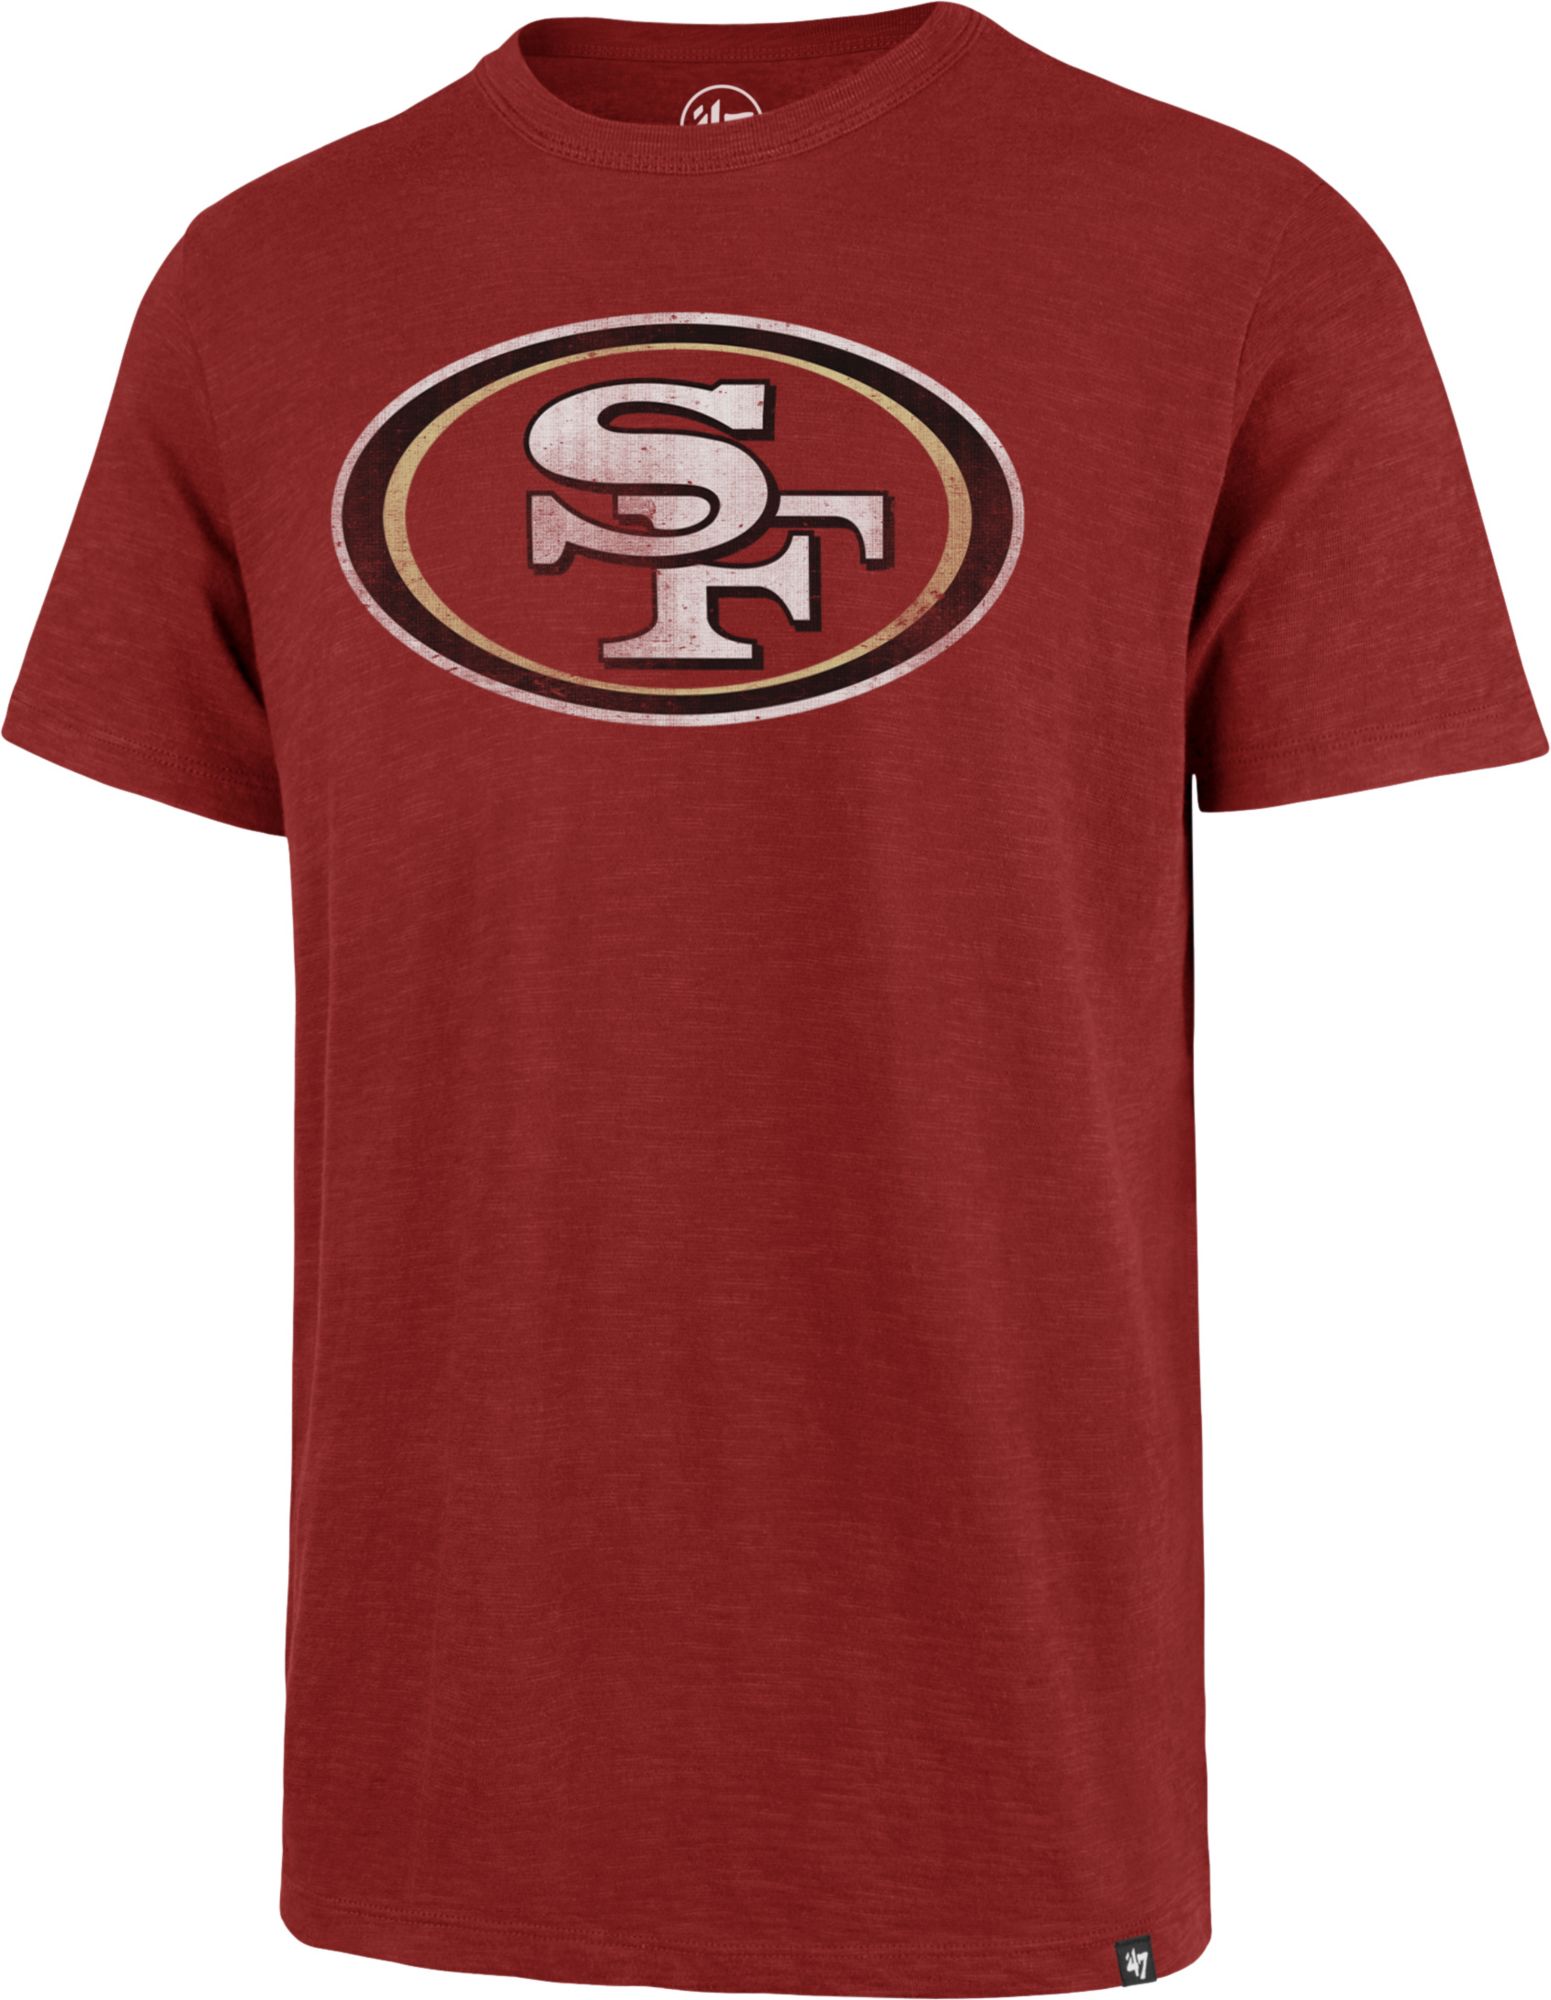 authentic 49ers gear